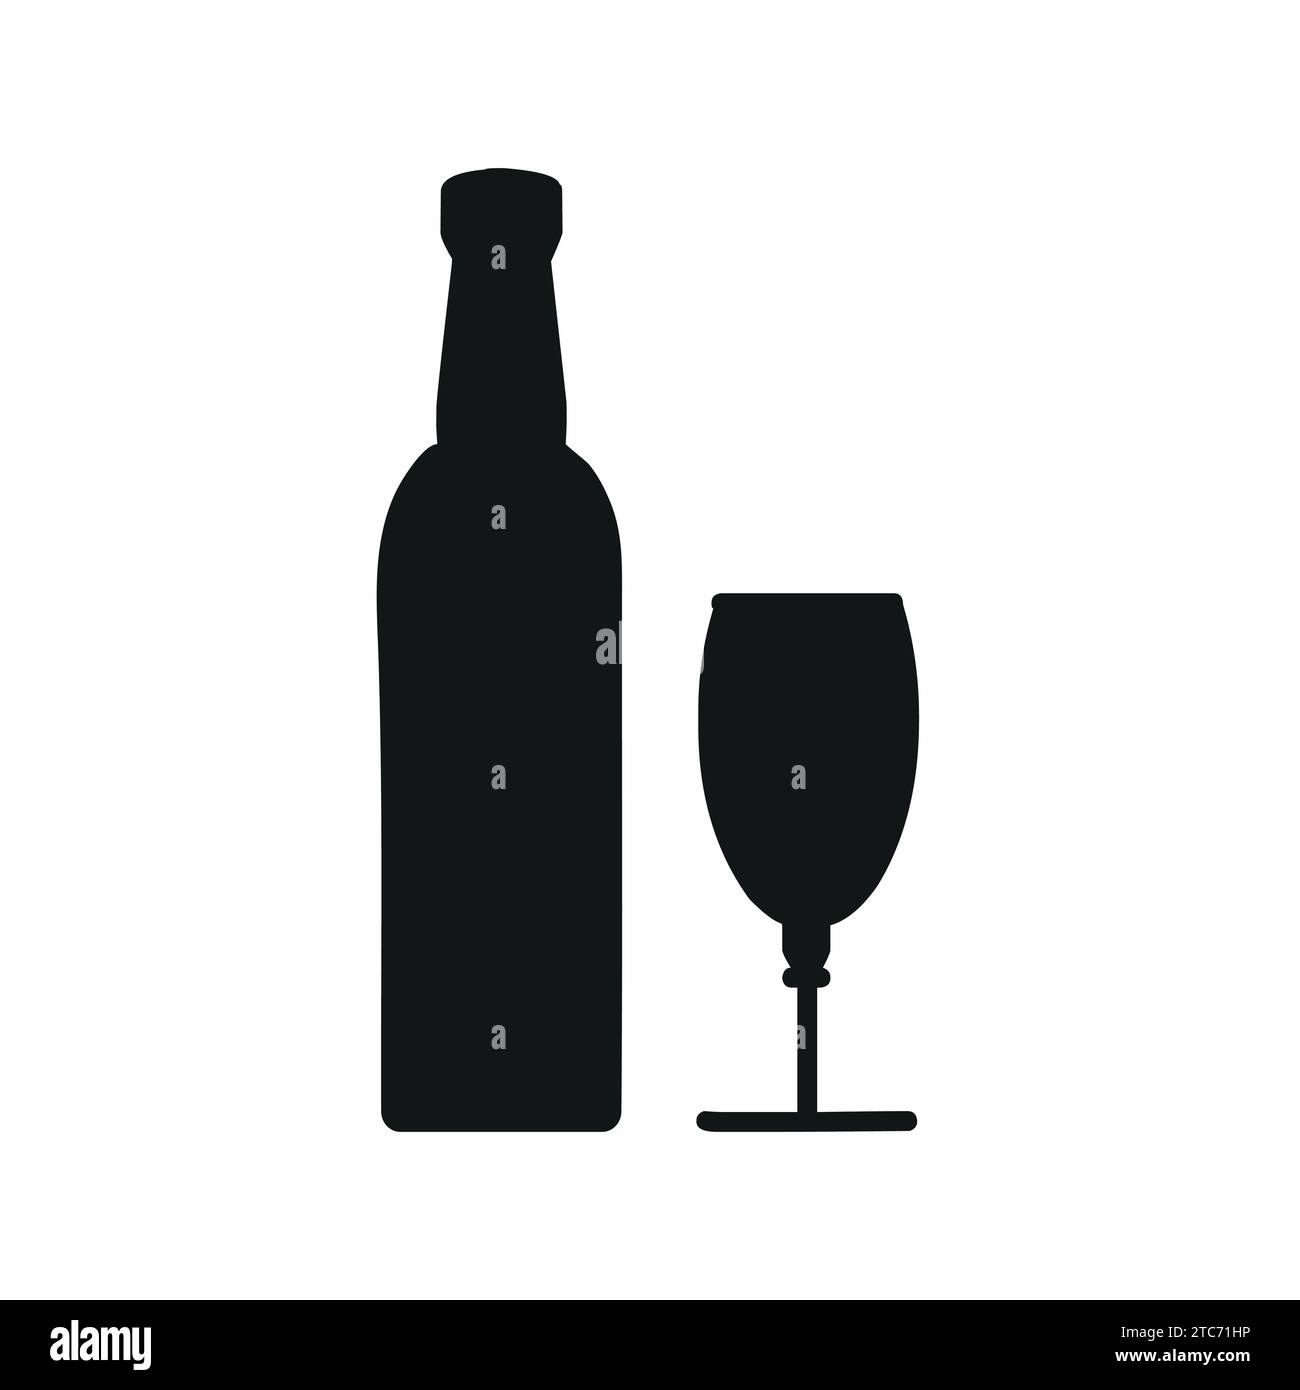 Wine bottle alcohol with wine glass symbol vector illustration. Stock Vector